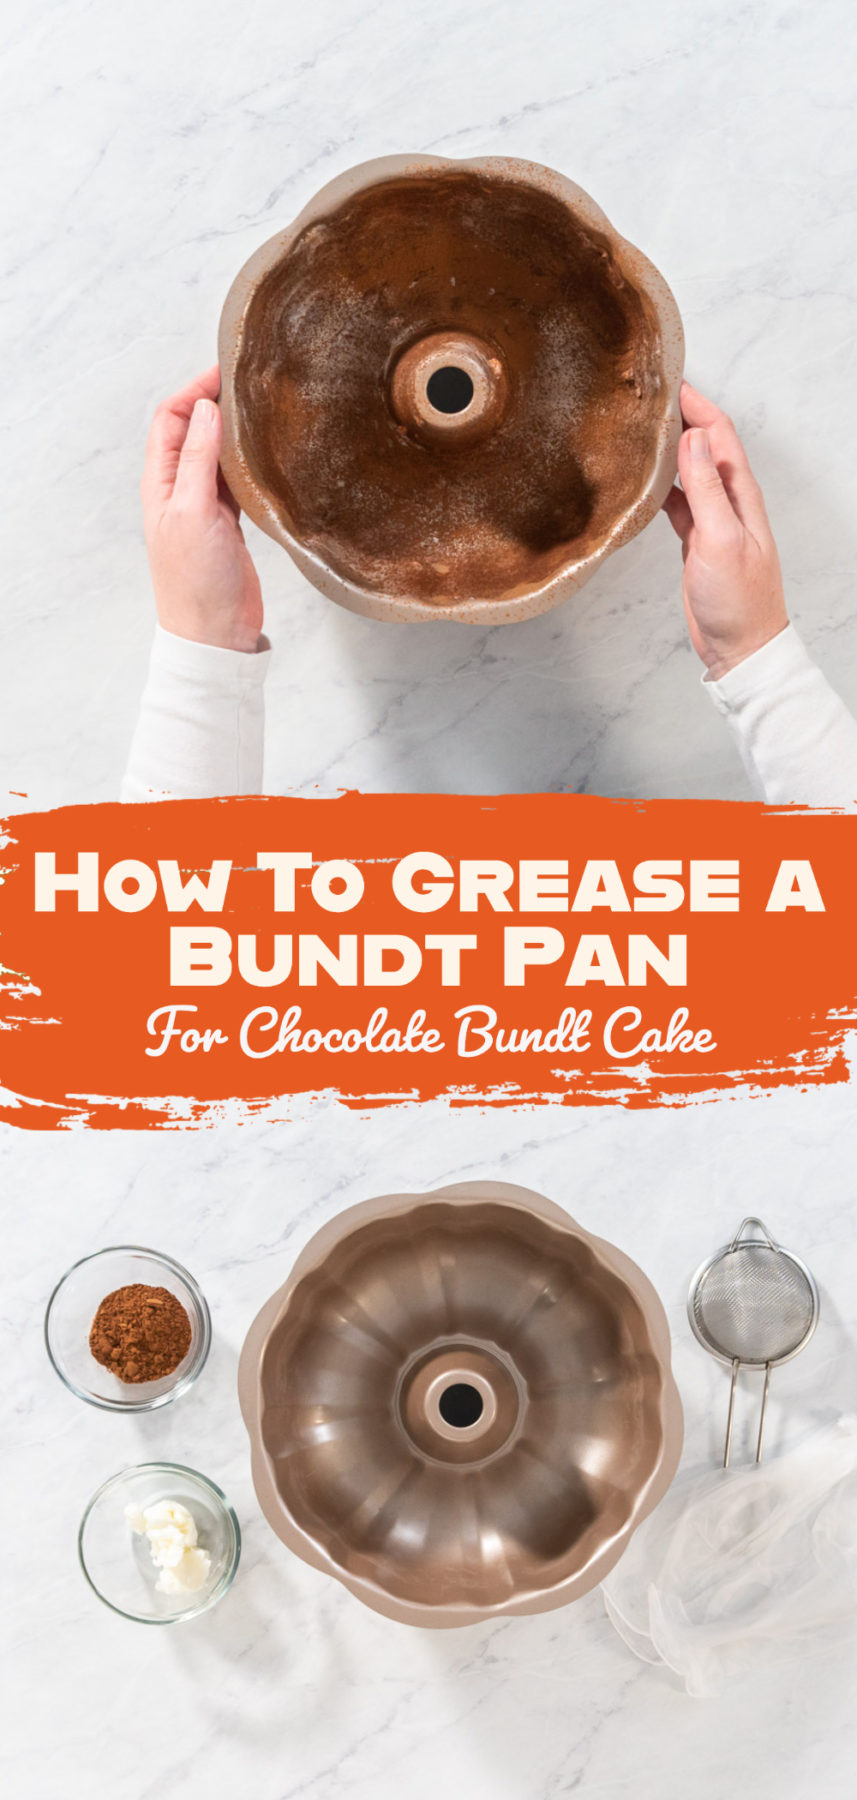 How To Grease a Bundt Pan For Chocolate Bundt Cake